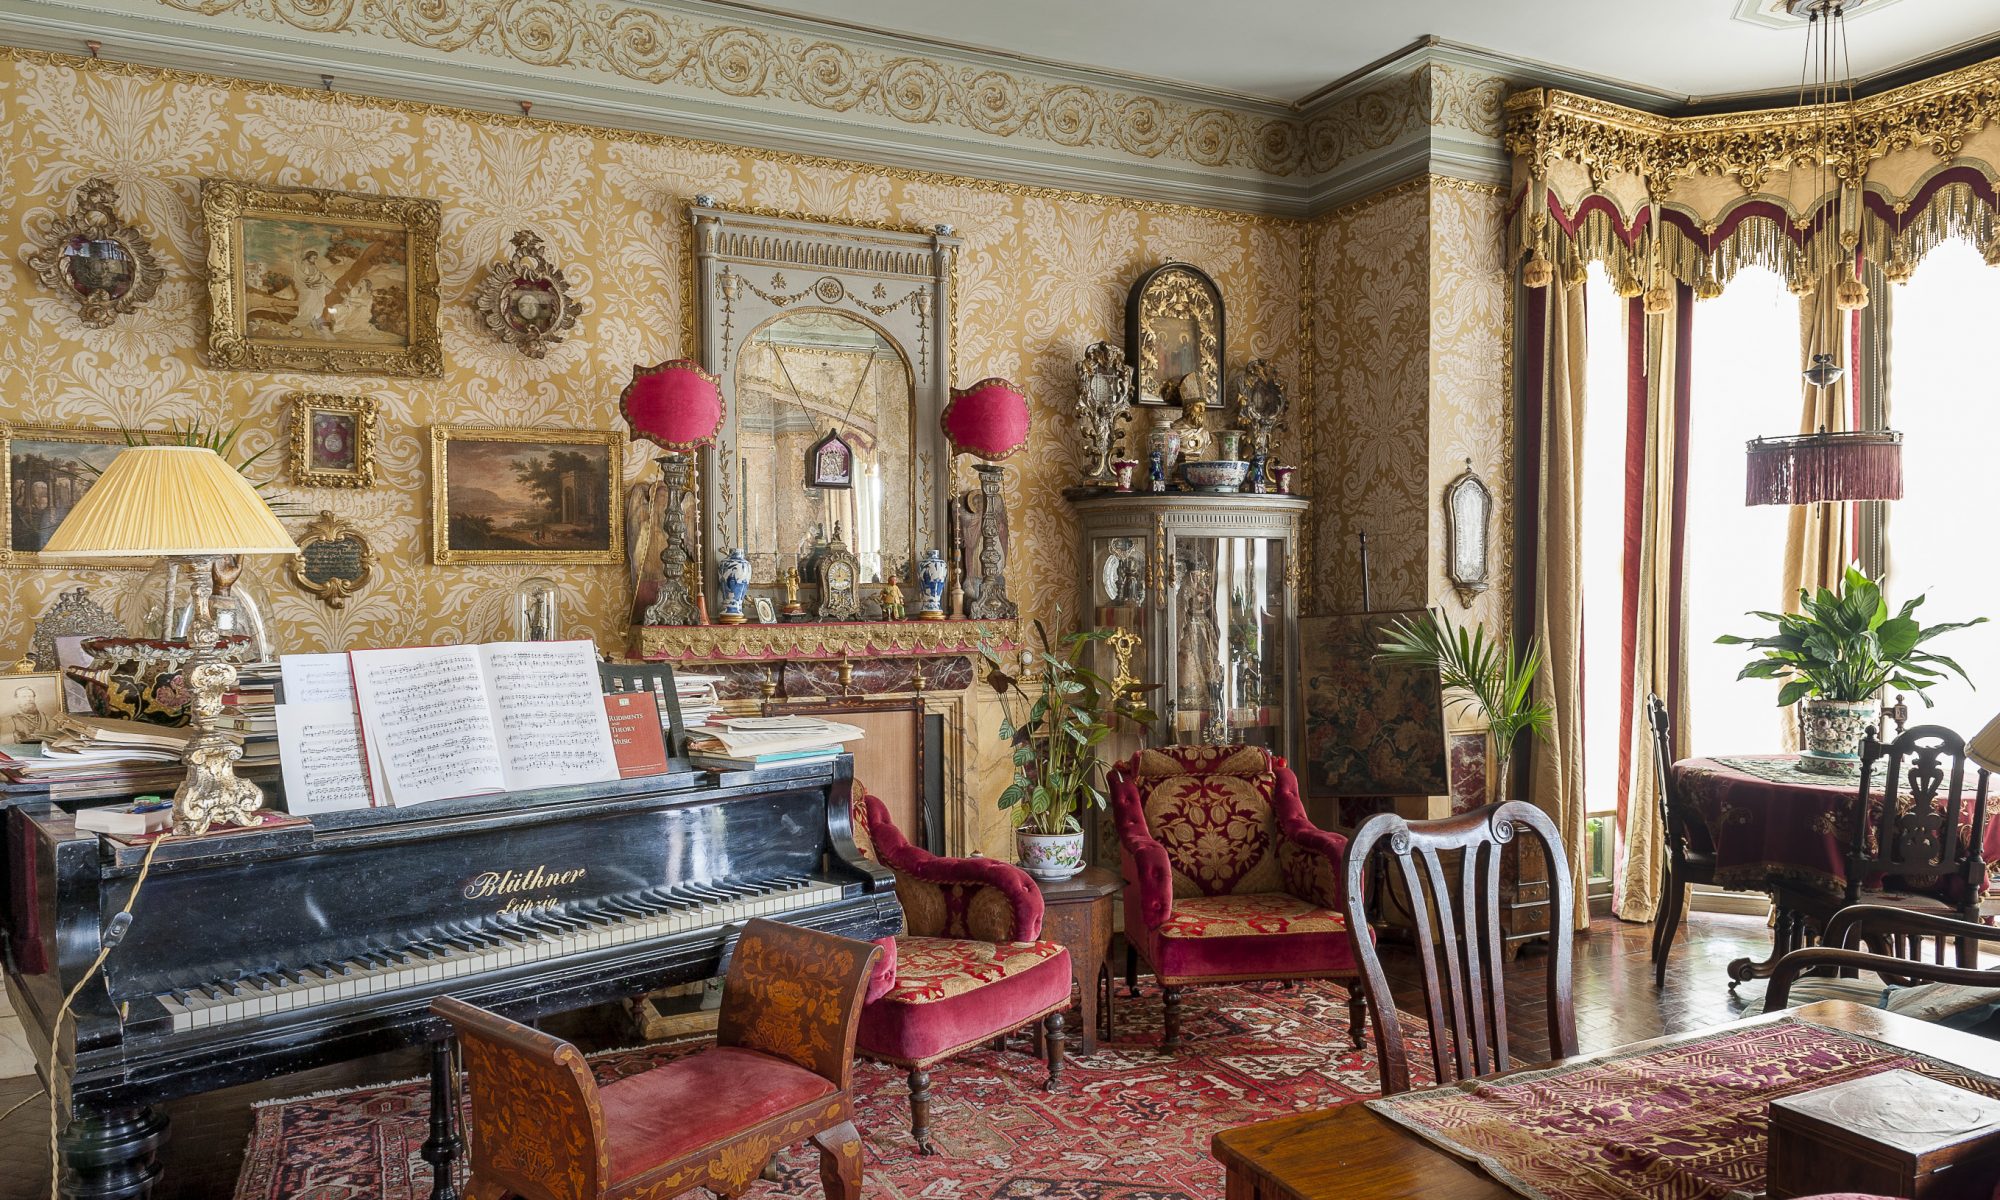 This half of the drawing room, now resplendent with a grand piano – the house’s co-owner, Stephen Groves, is a pianist and church organist – was their kitchen